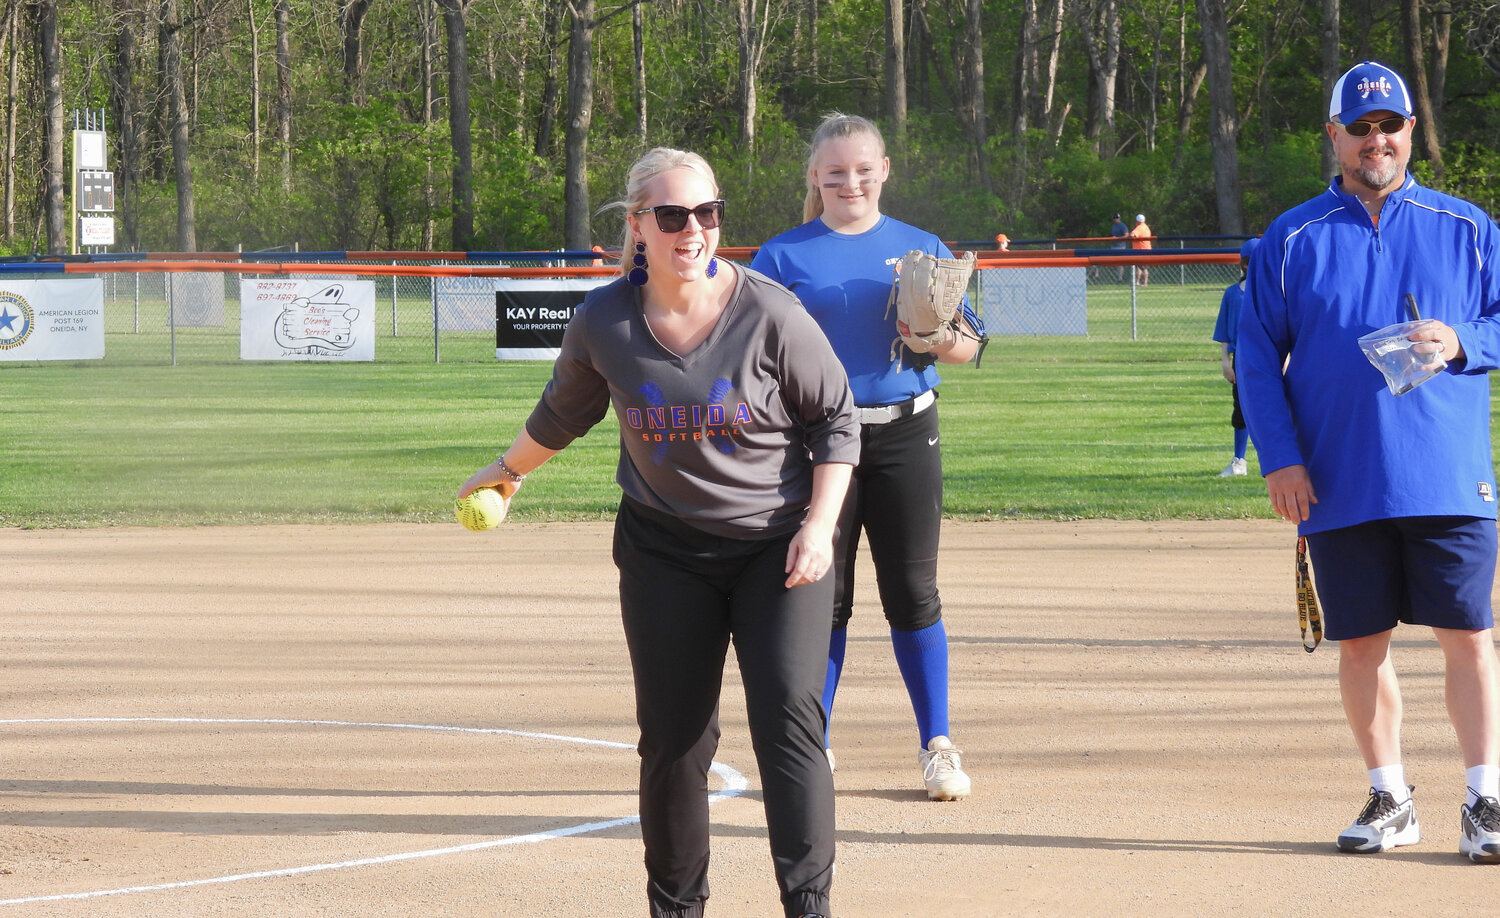 Worthy Owner Jennifer Bailey throws out the ceremonial first pitch for an Oneida Girl's Little League Softball game on Thursday, May 11 at Maxwell Field in Oneida. Pictured alongside Bailey throwing the first pitch is Oneida Girl's Little League Softball Commissioner Nick Fedchenko and Pitcher Karalynne Camron, 12.